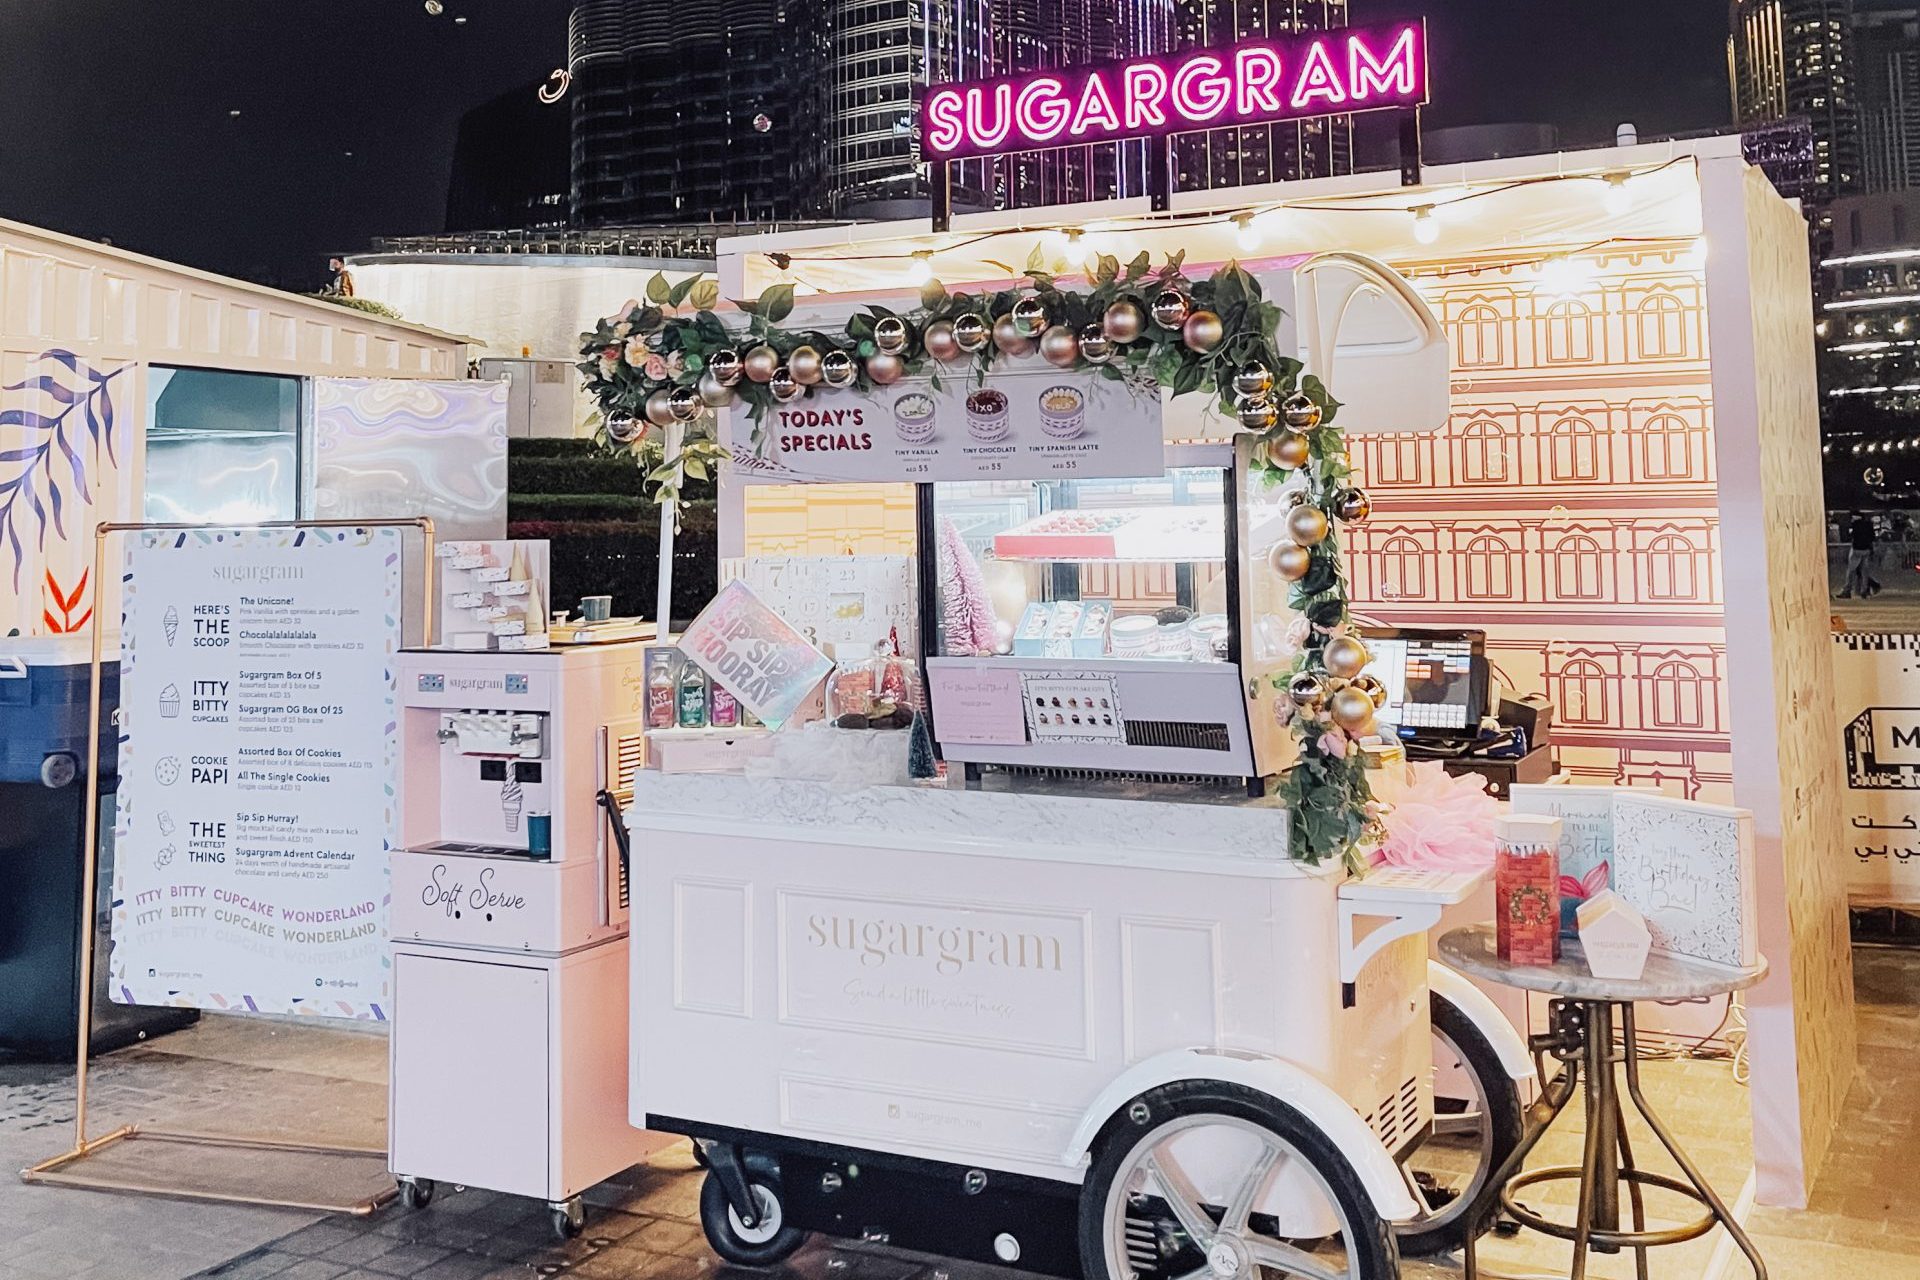 It’s not a party except Sugargram was invited with their cupcakery on wheels